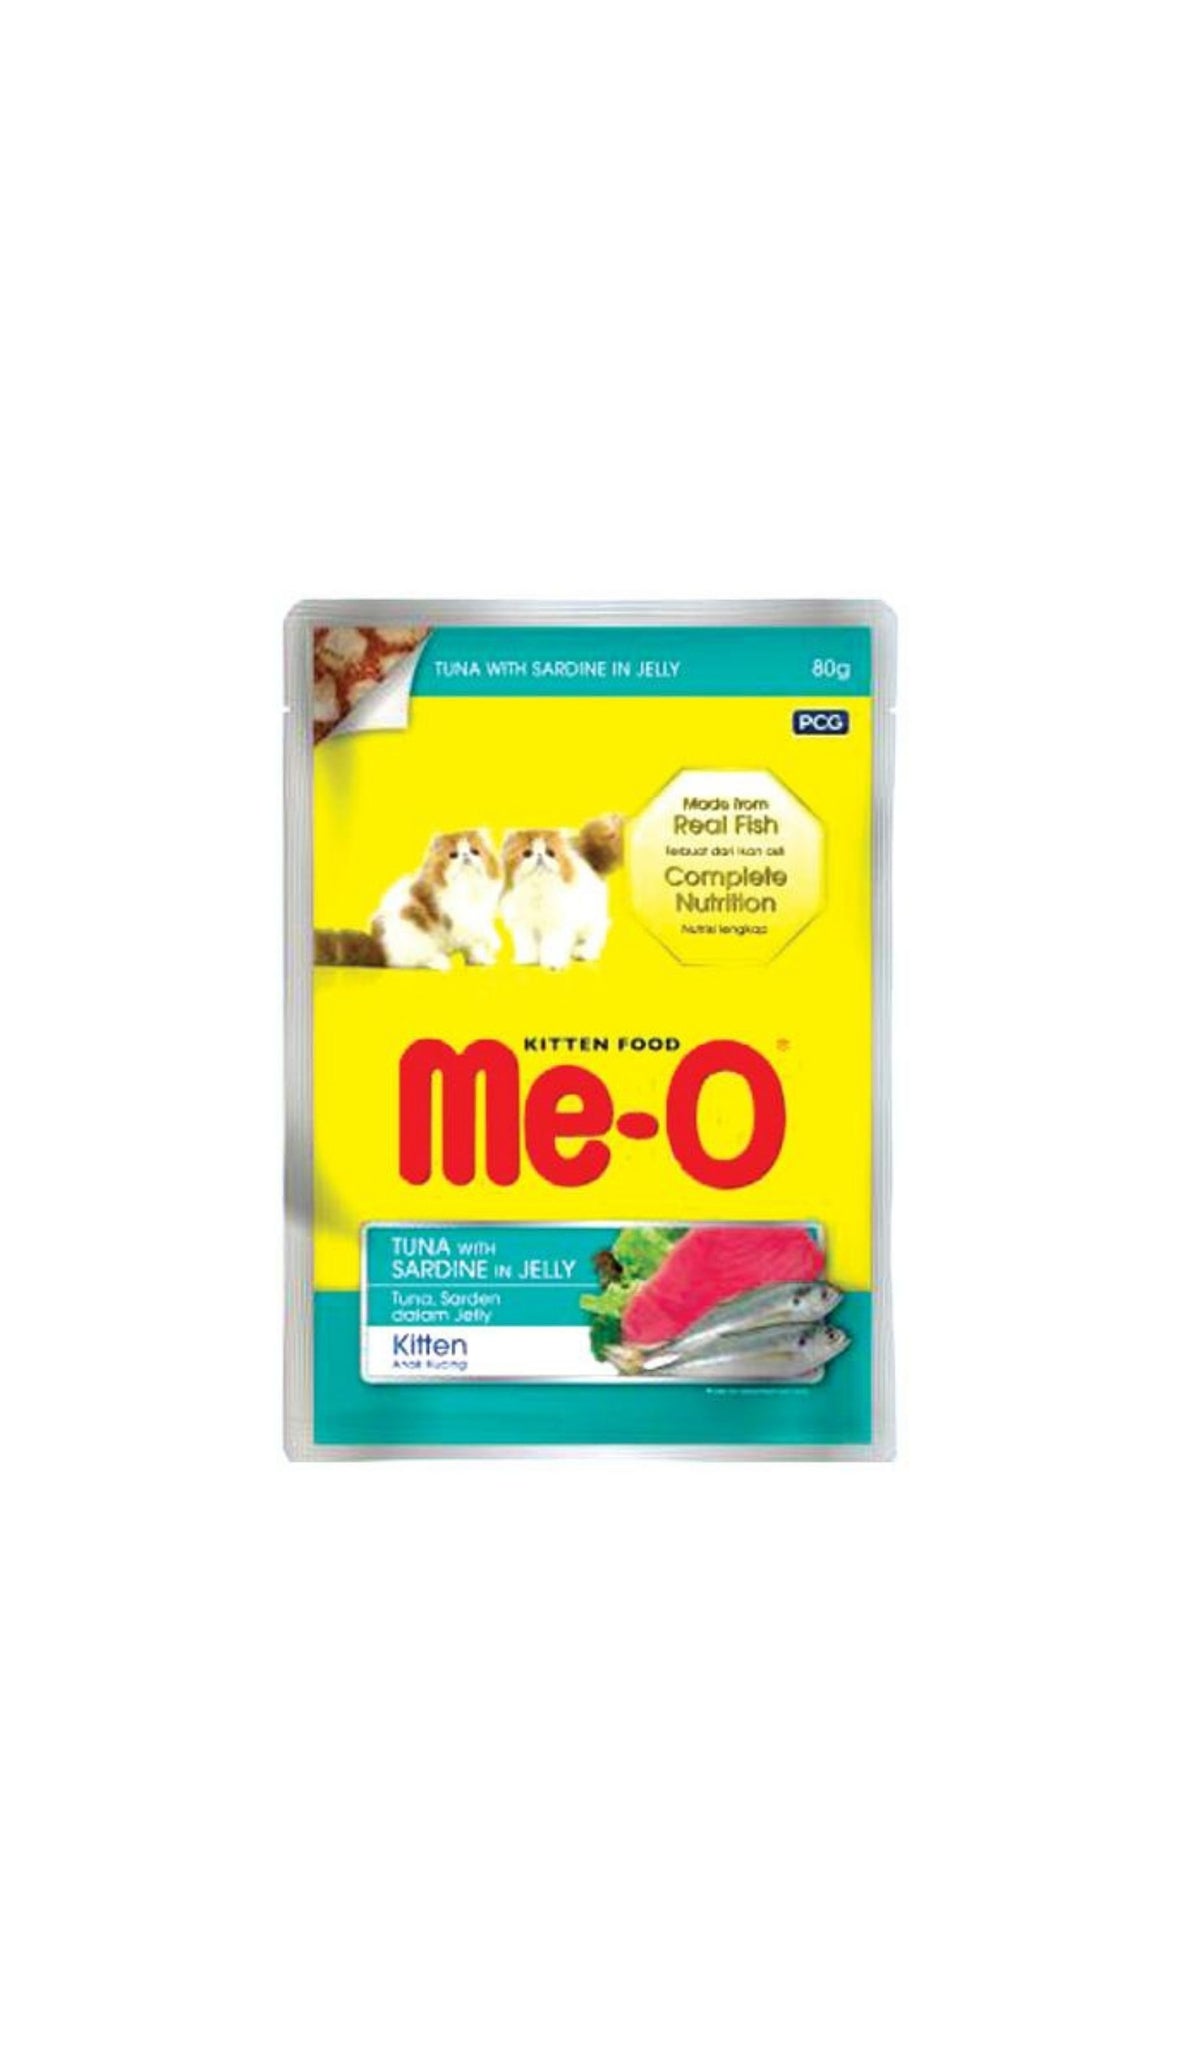 Me-O Tuna with Sardine in Jelly Kitten Wet Food Pouch 80g